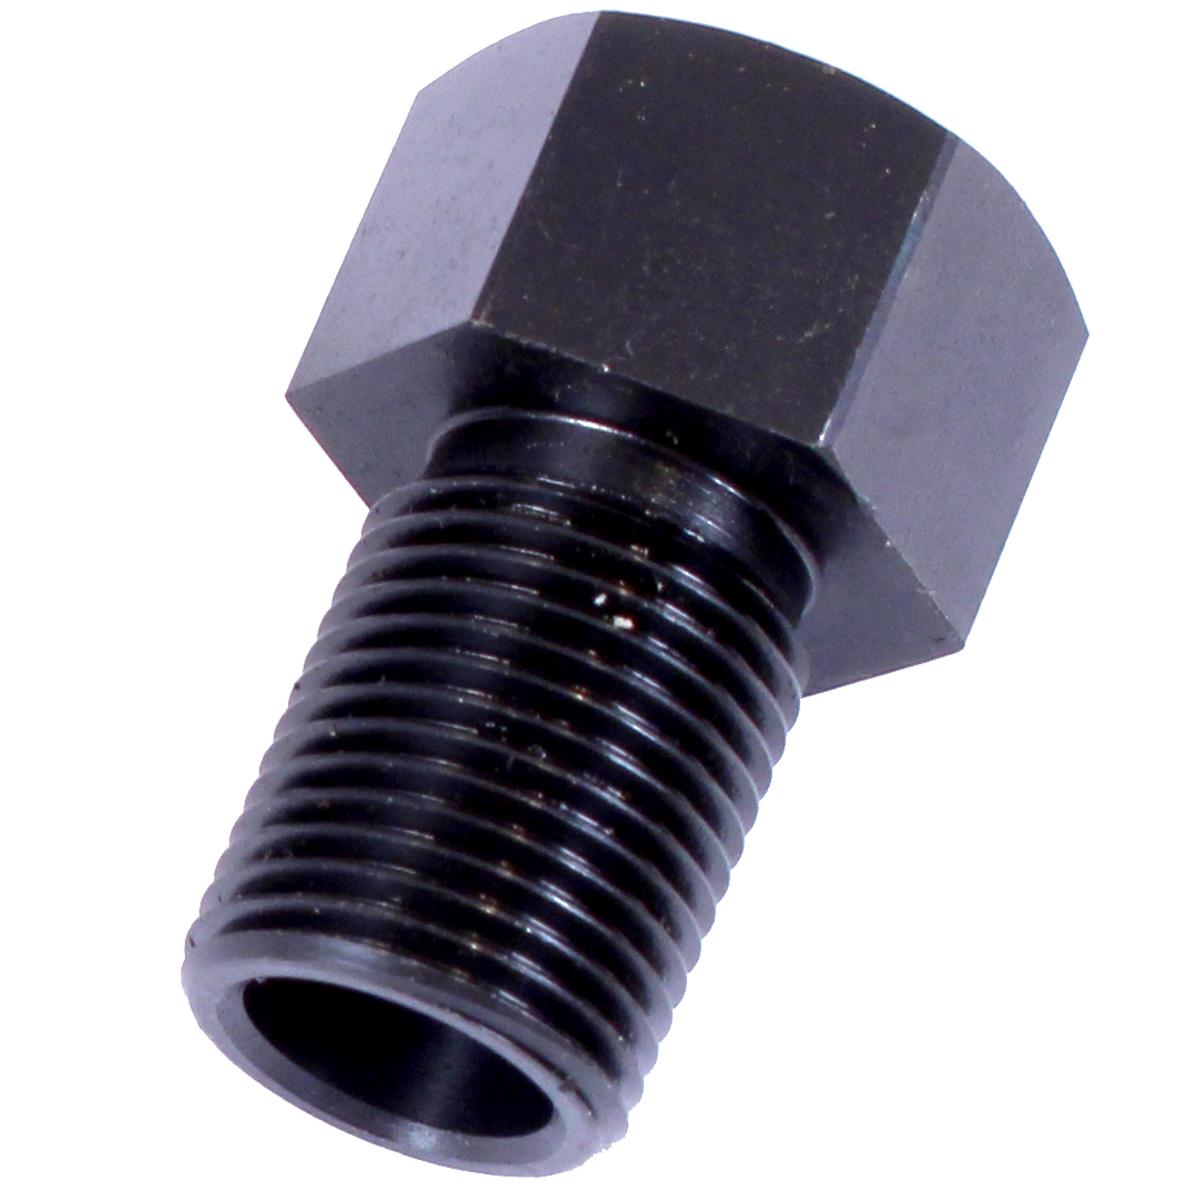 Spindle adapter